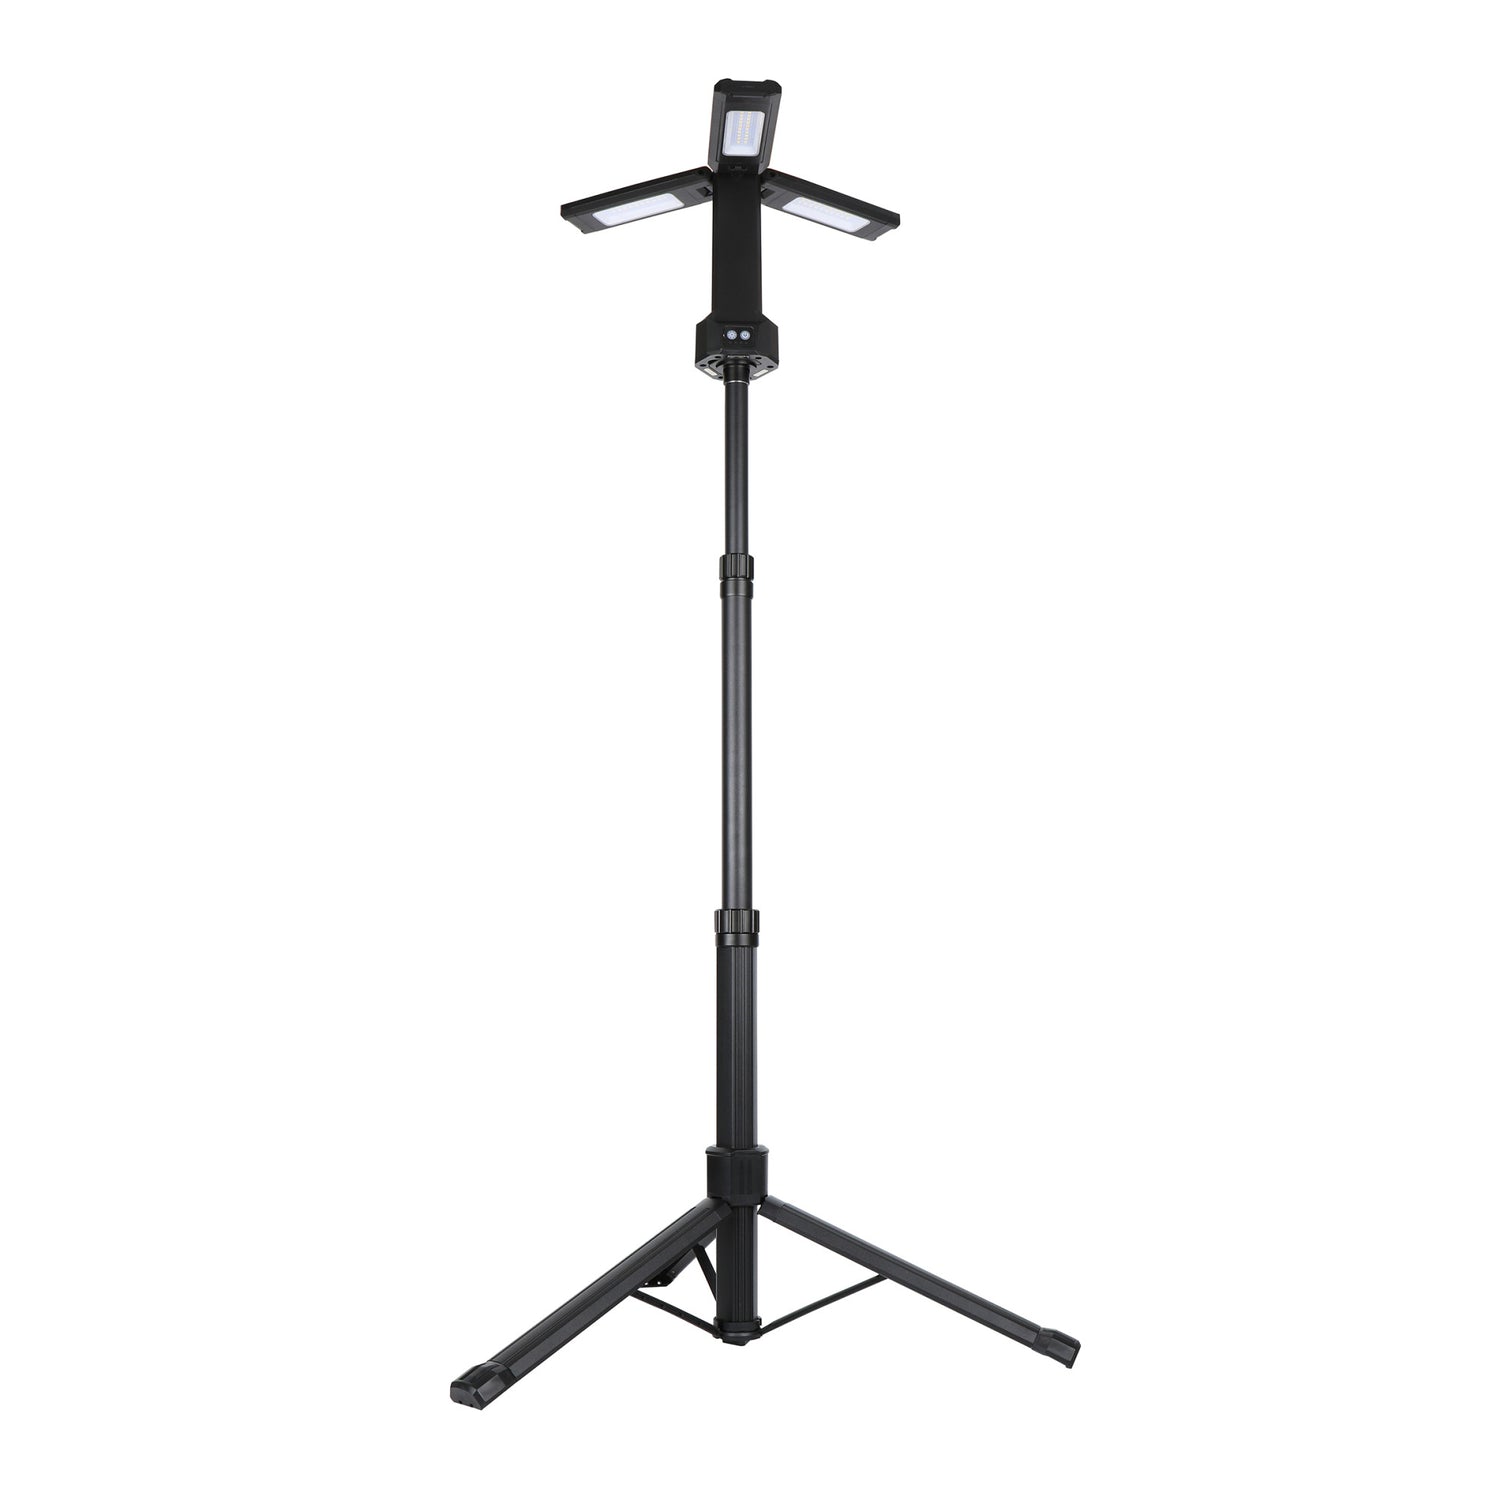 2000 Lumen Rechargeable LED Work Light With Tripod